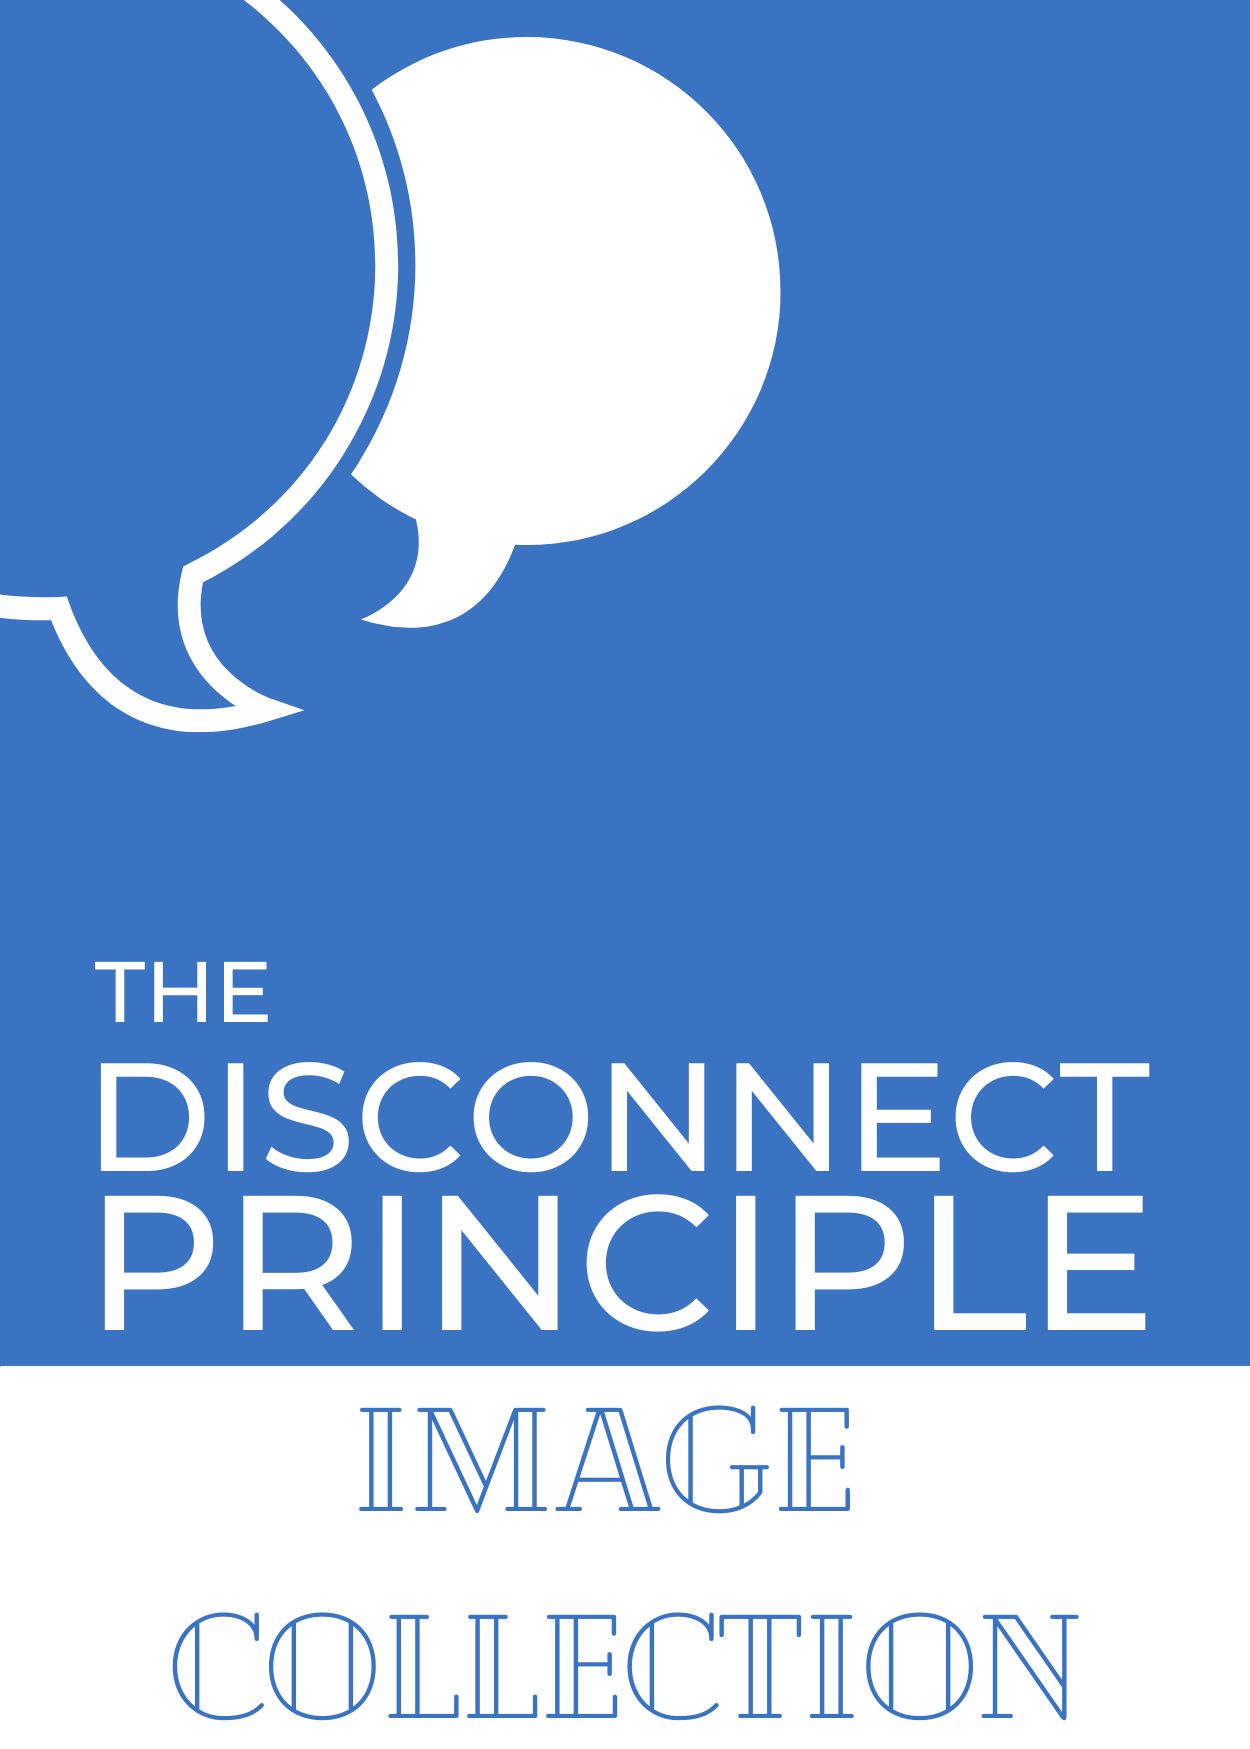 The Disconnect Principle Image Collection